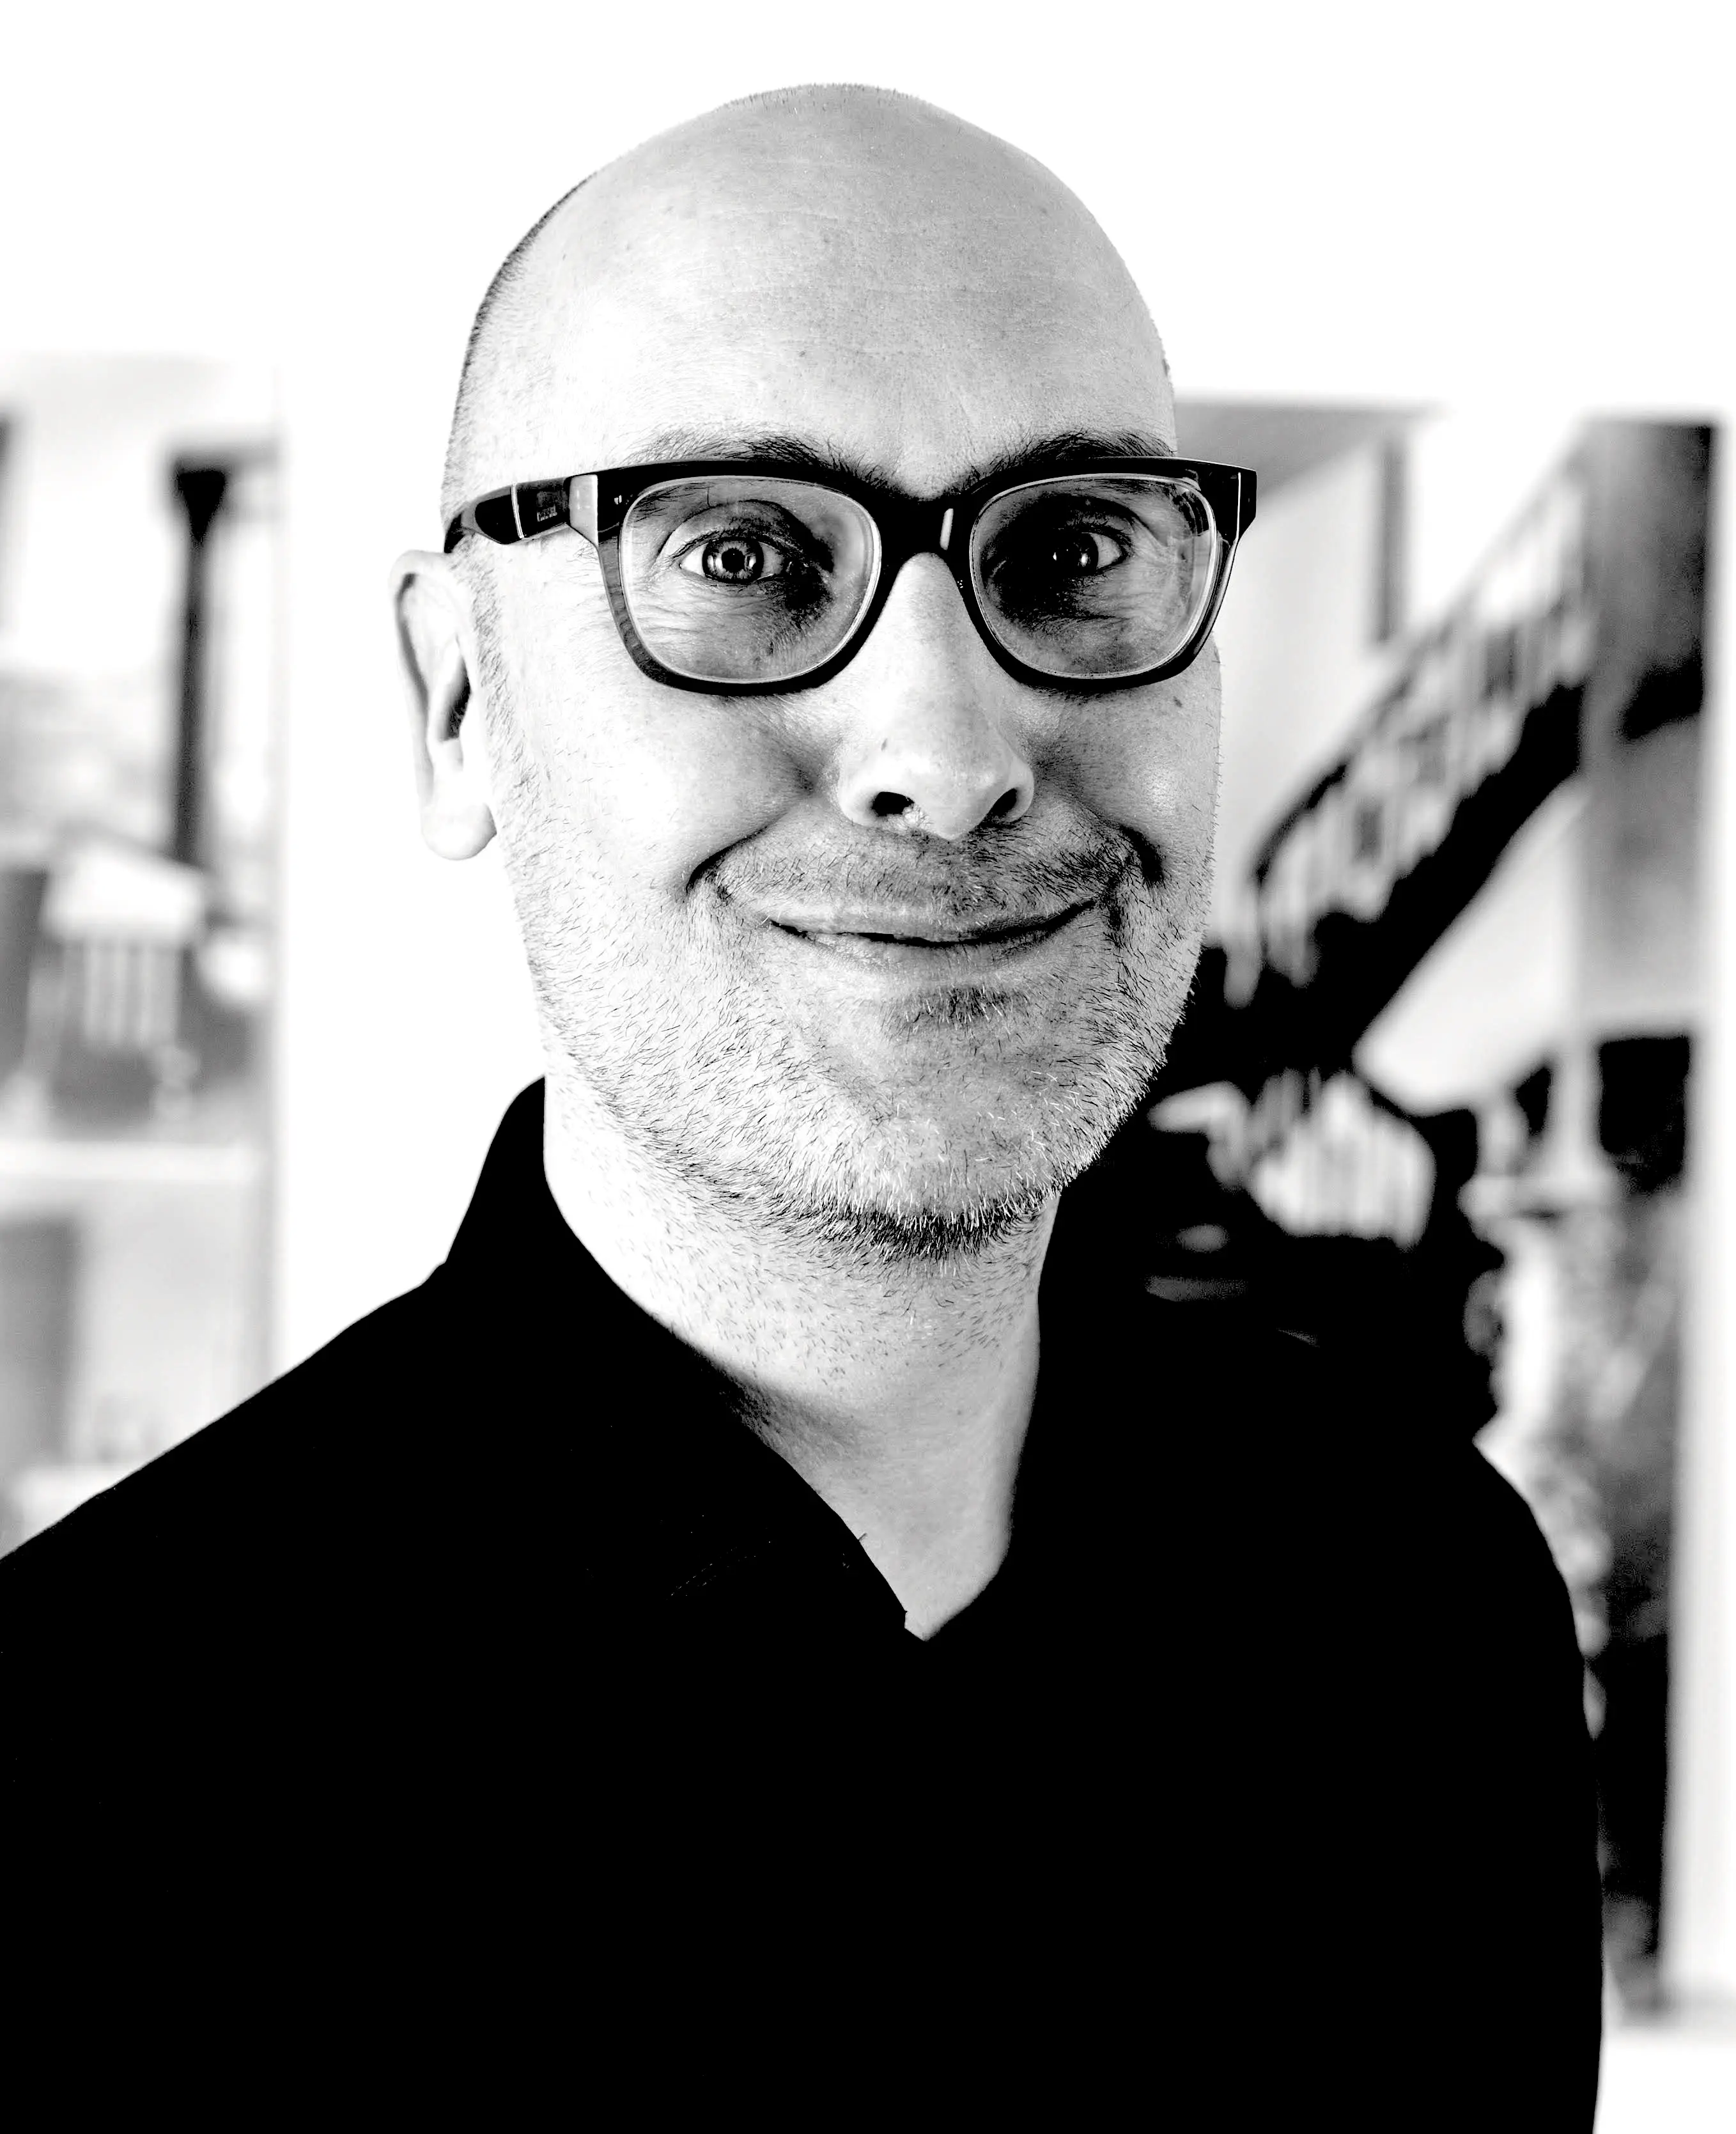 Black and white photo of Jussi Parikka in black shirt, dark thick glasses with a shaved head and a smile.